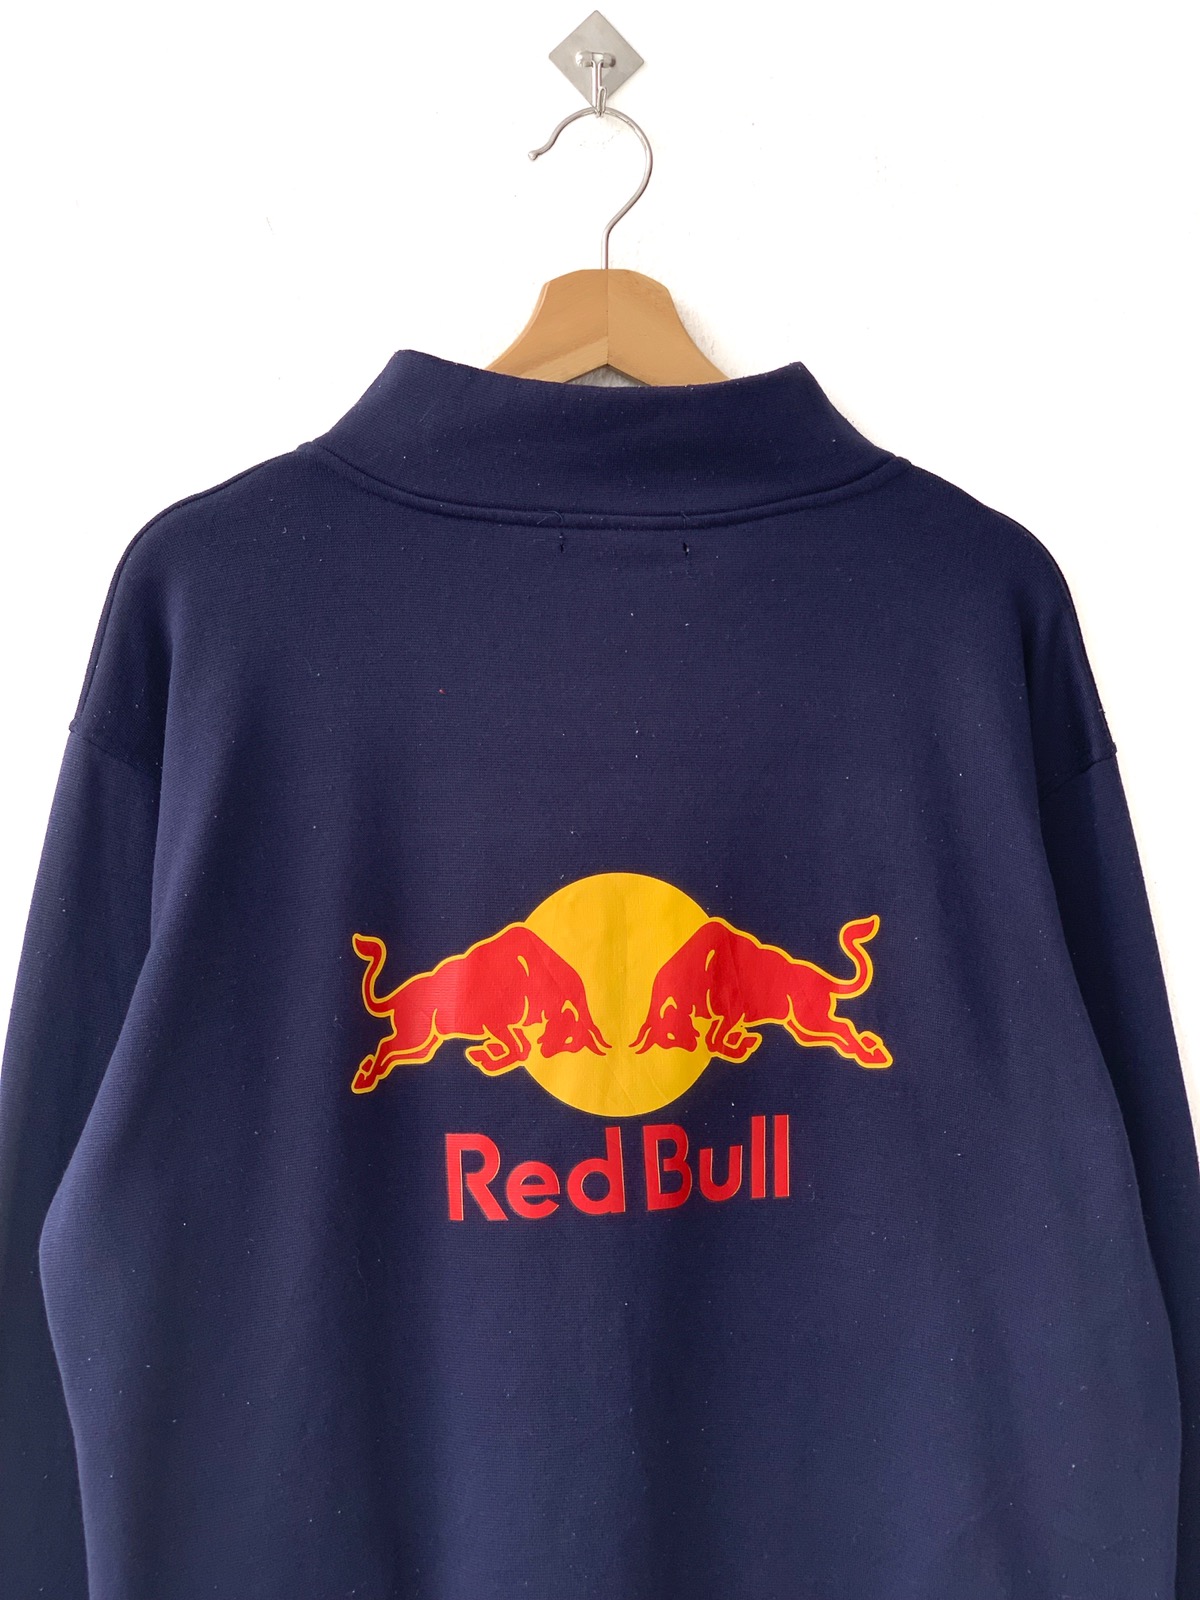 Other Designers Red Bull - Vintage Red Bull Sweatshirt, conceptialfinds